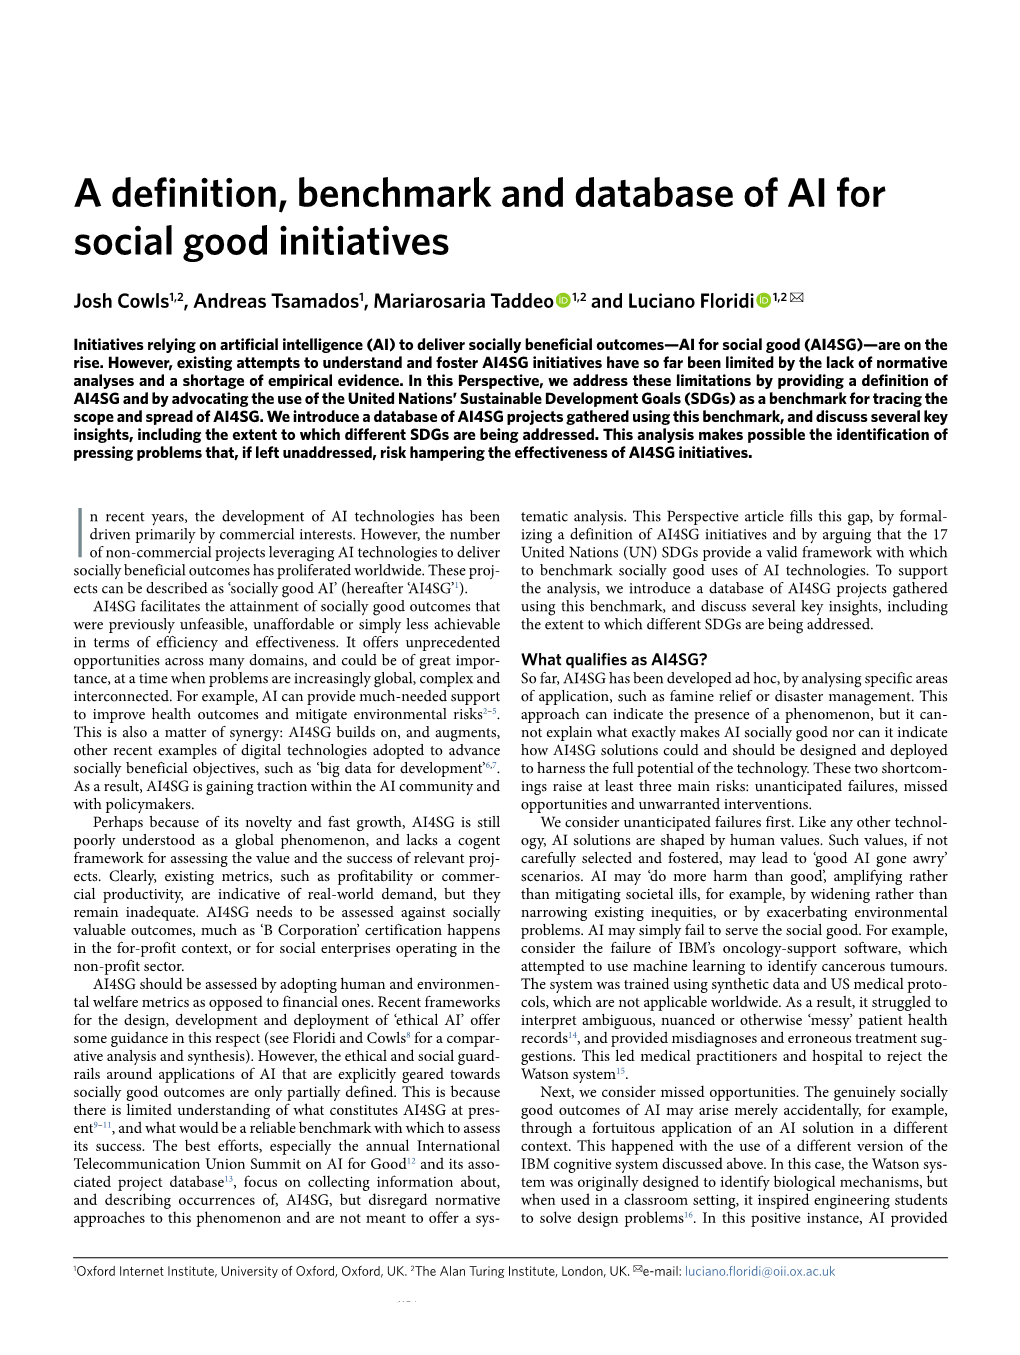 A Definition, Benchmark and Database of AI for Social Good Initiatives